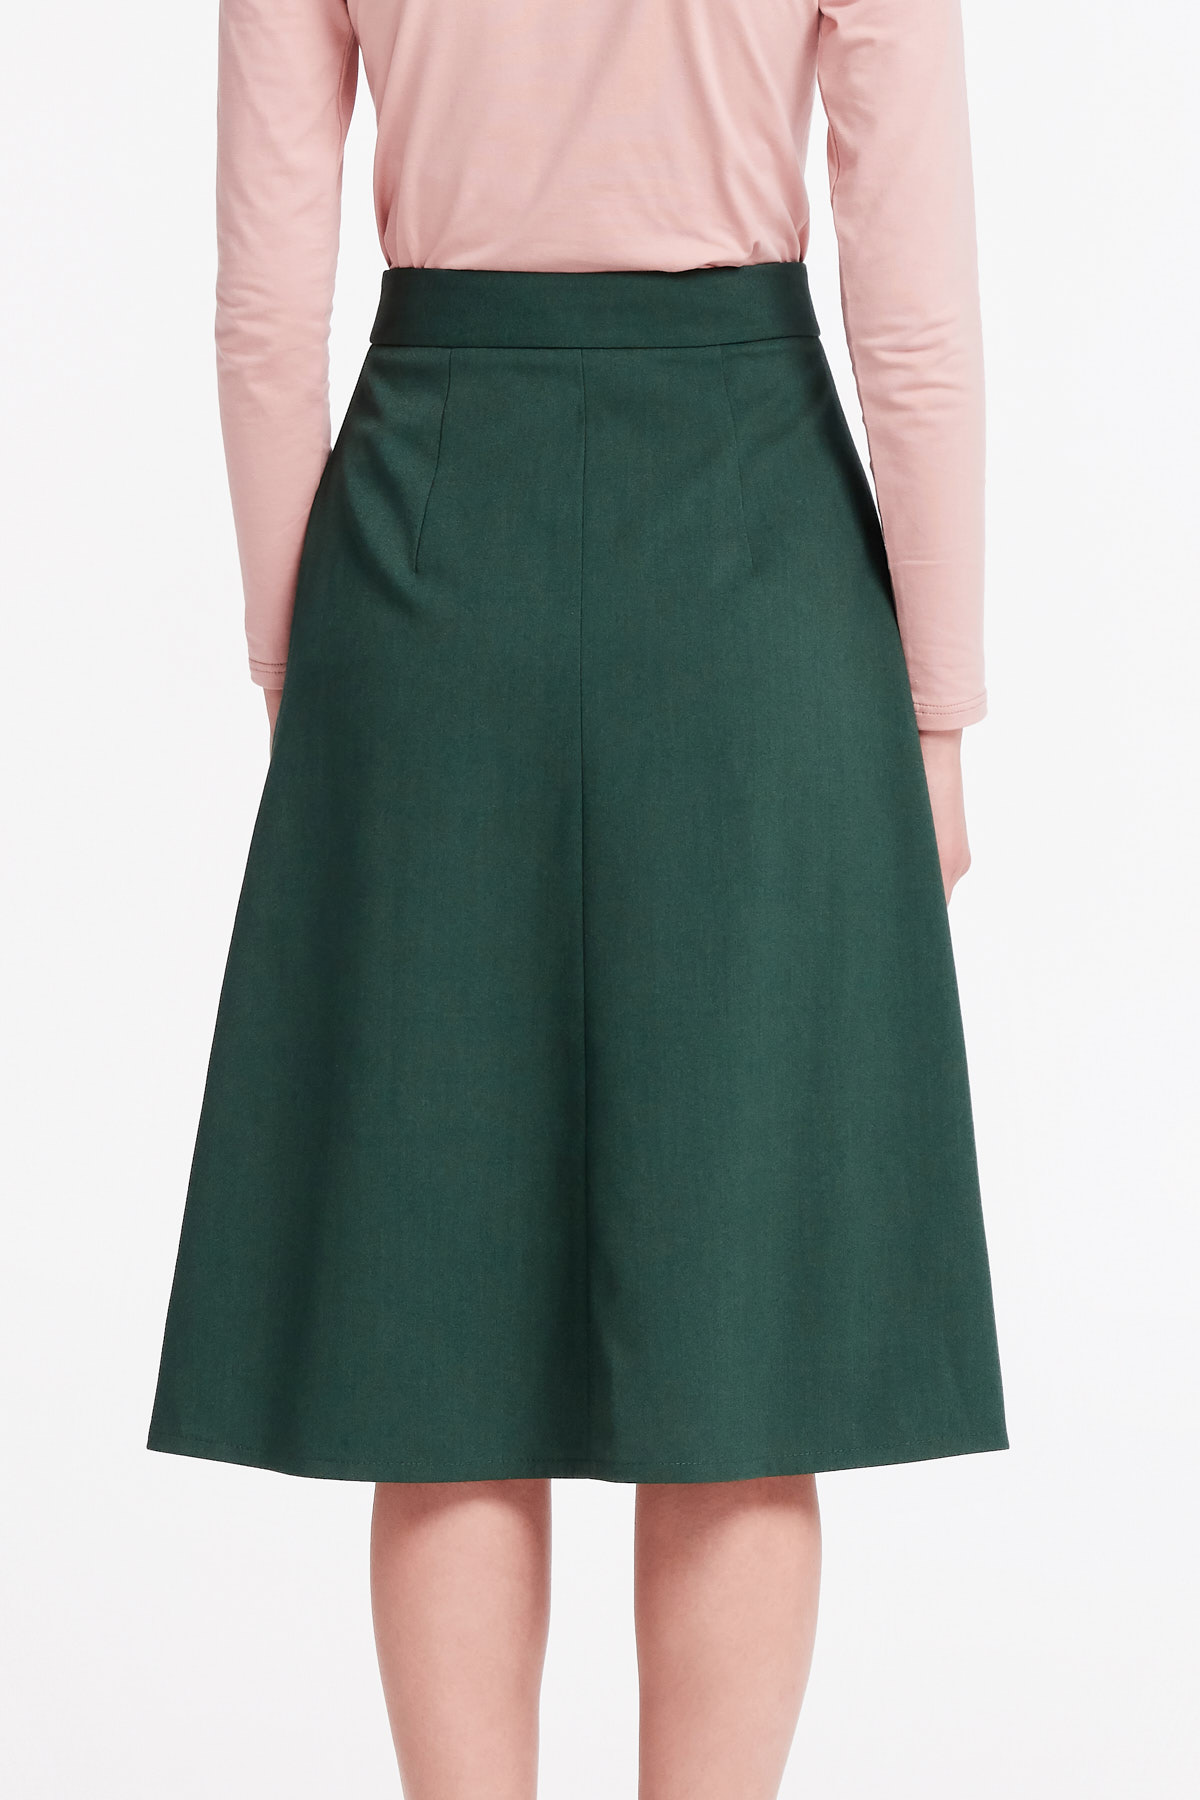 Green midi dress with a front zip, photo 5